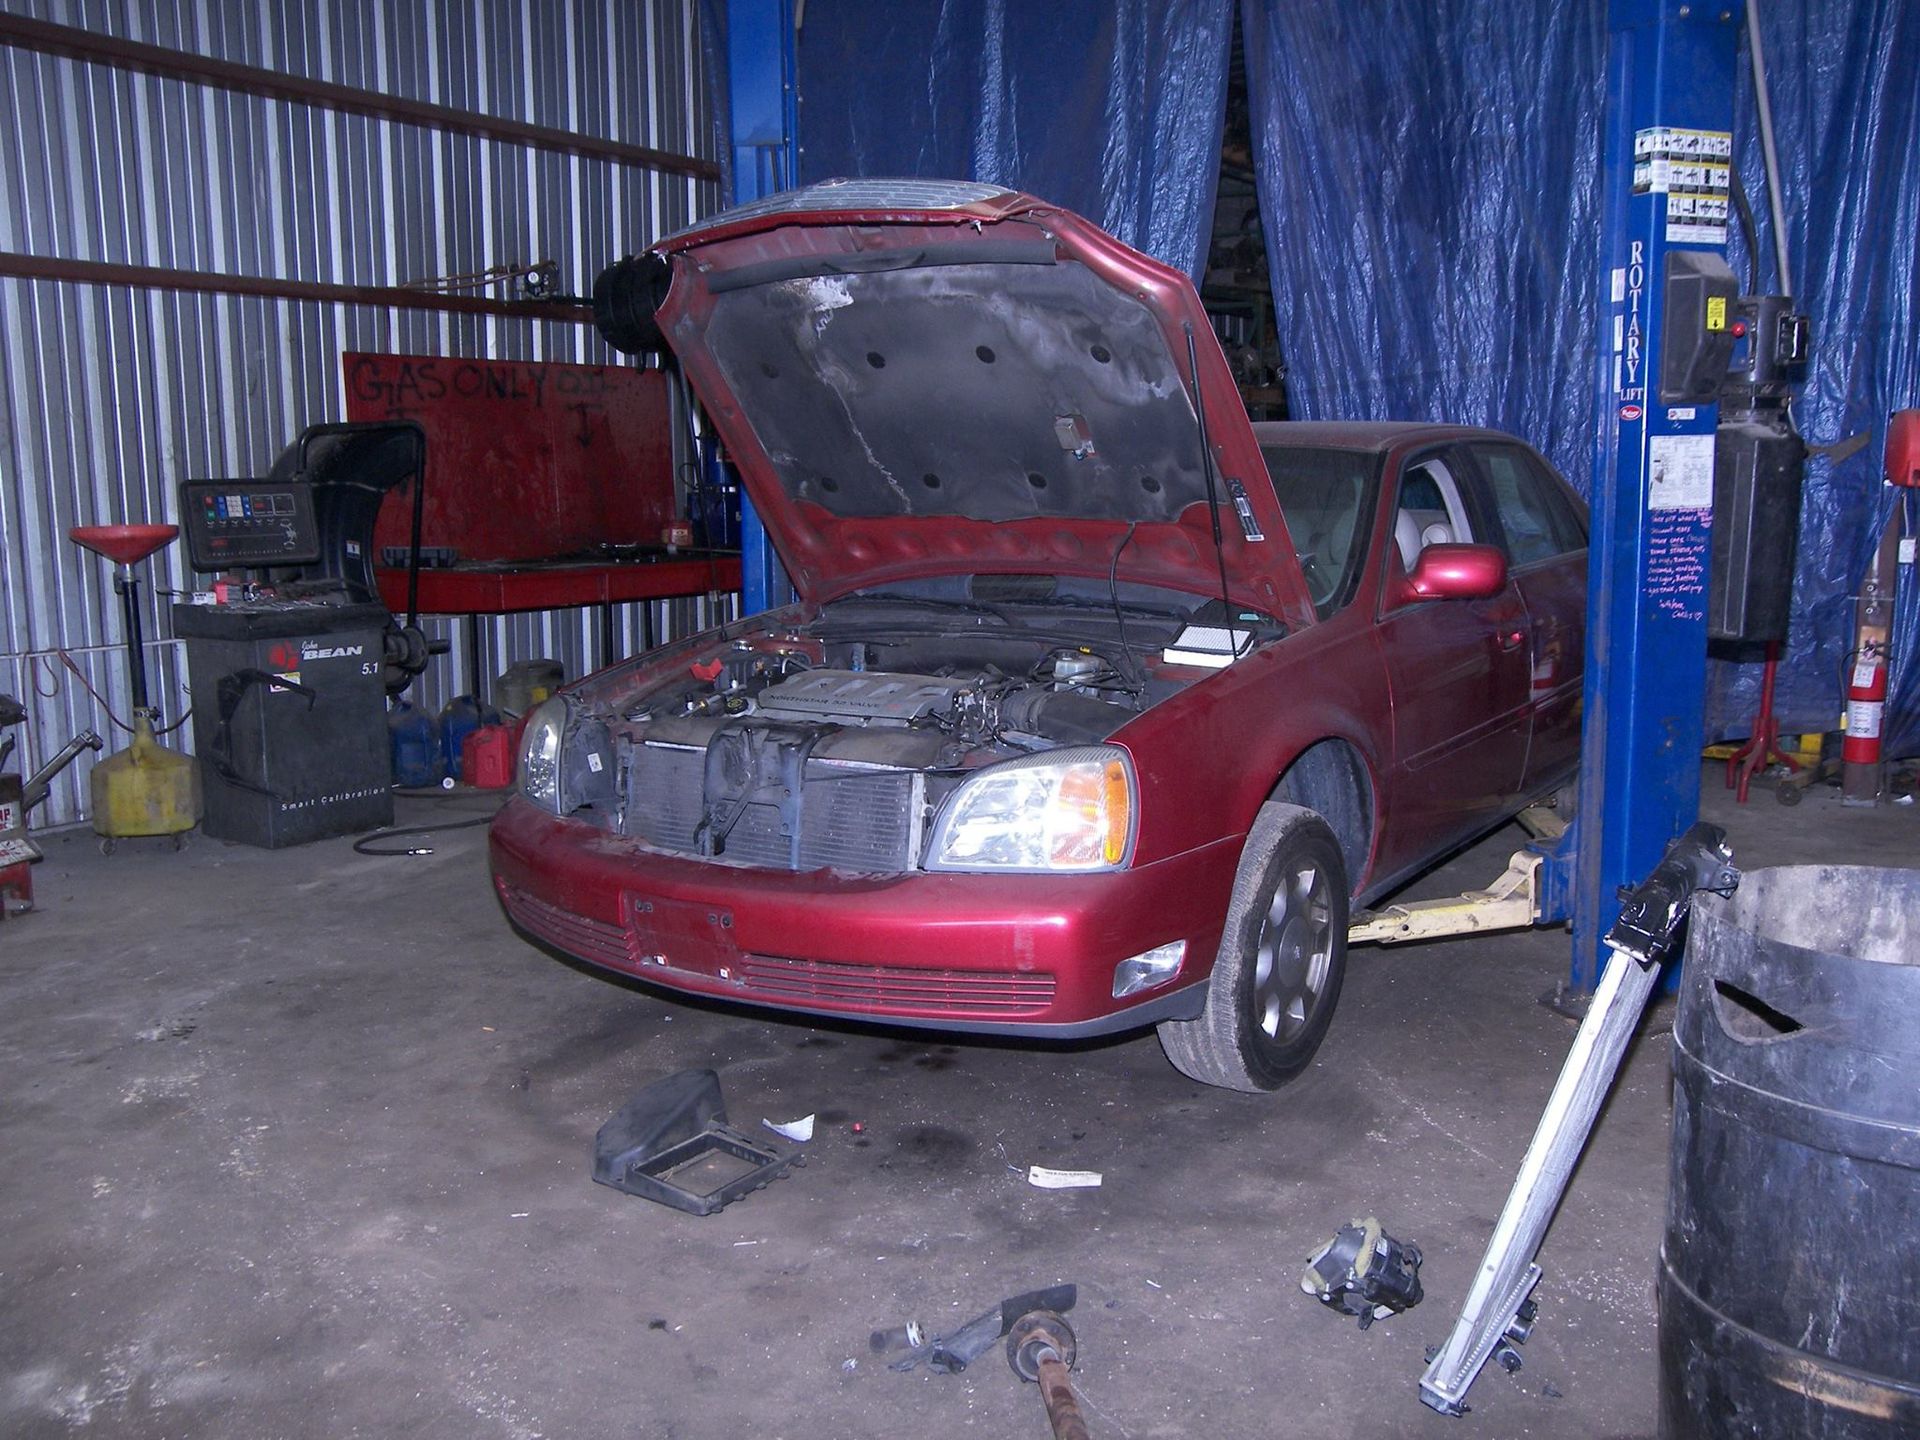 A red car with the hood up in a garage